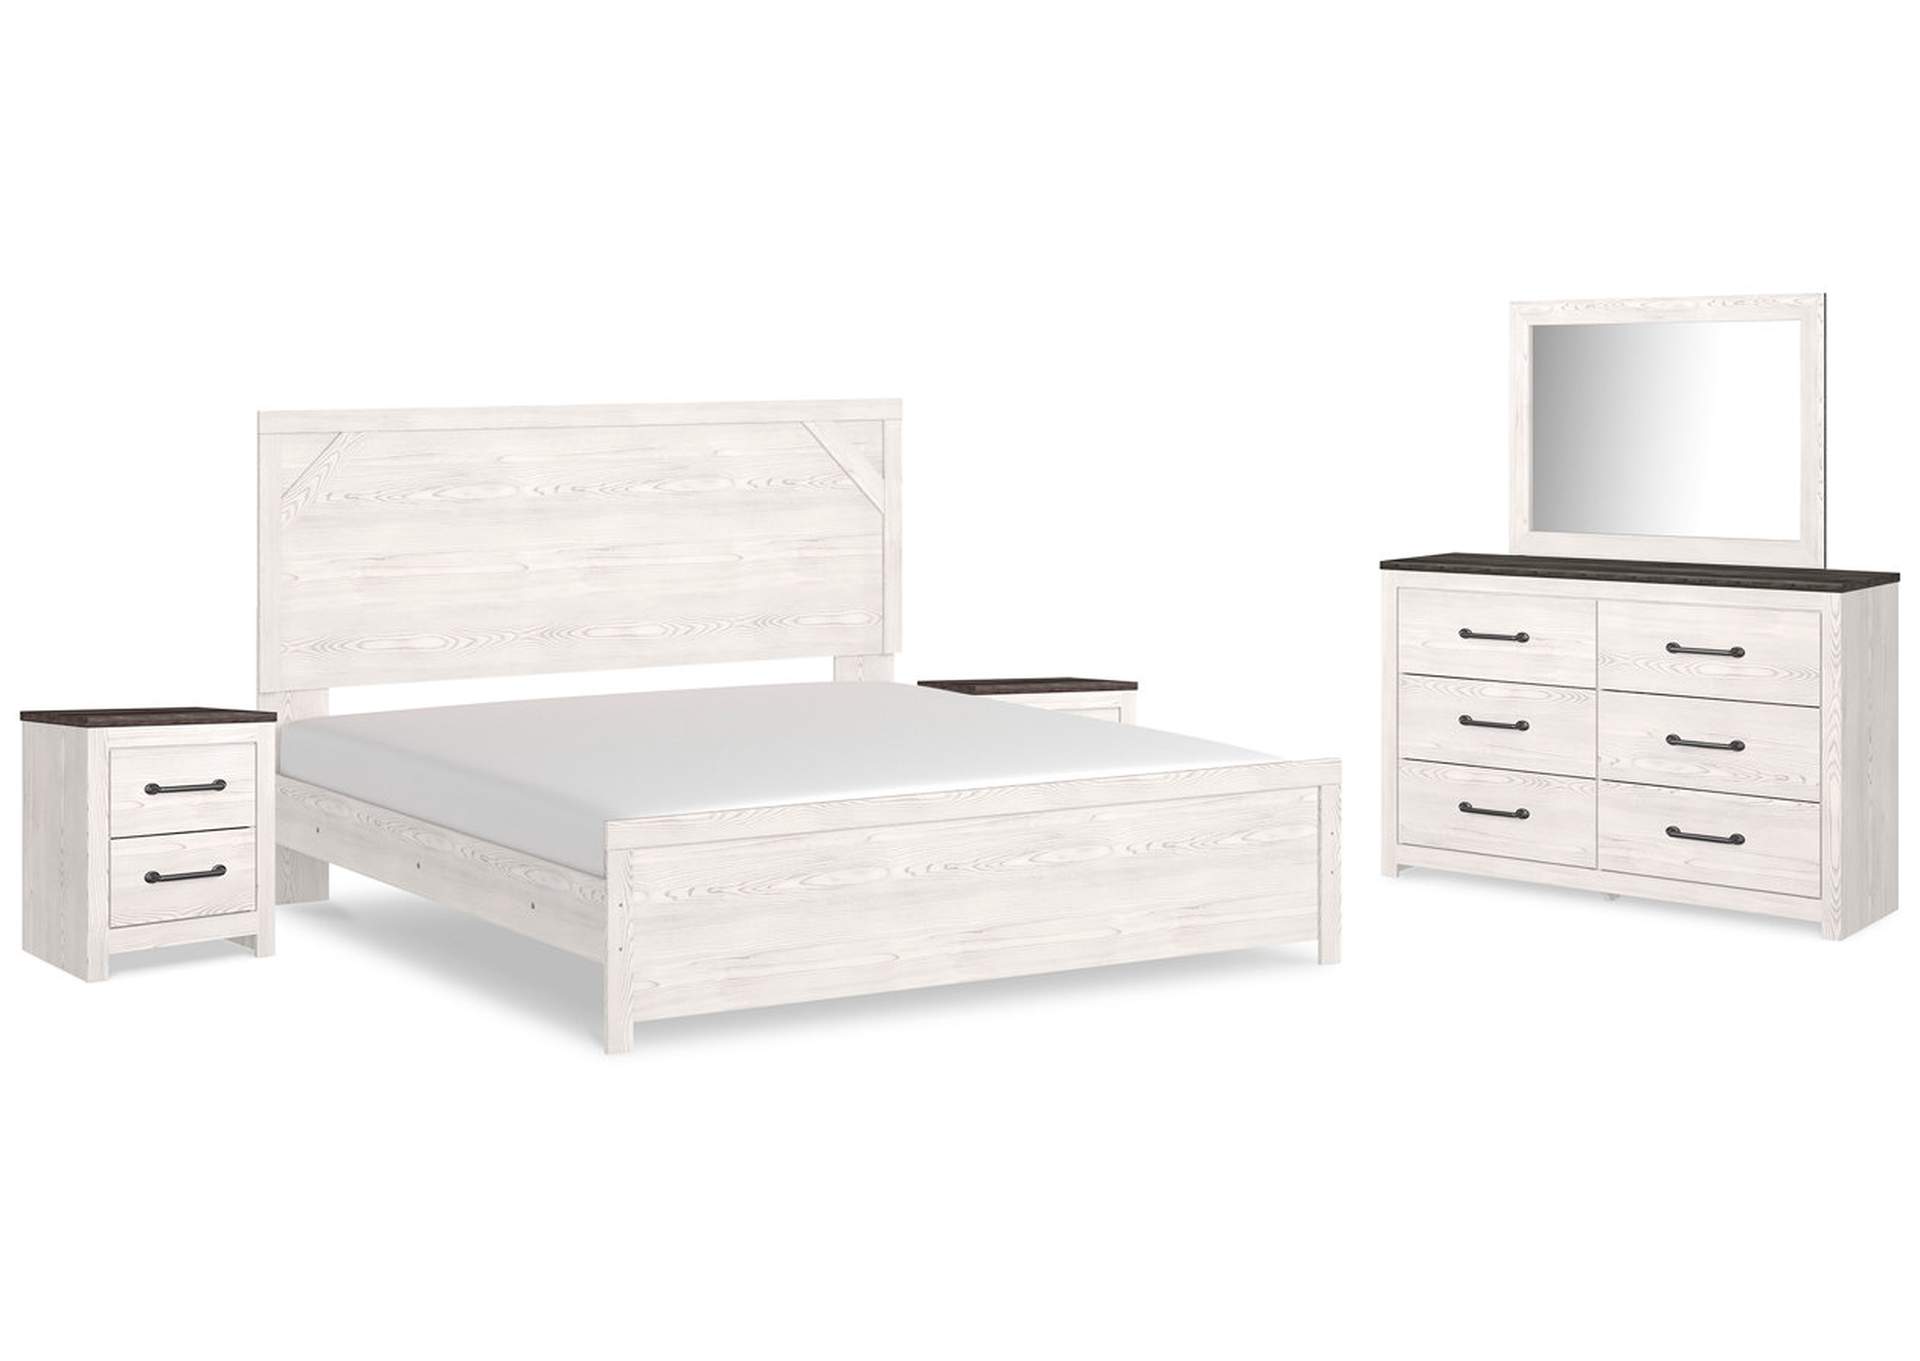 Gerridan King Panel Bed, Dresser, Mirror and 2 Nightstands,Signature Design By Ashley